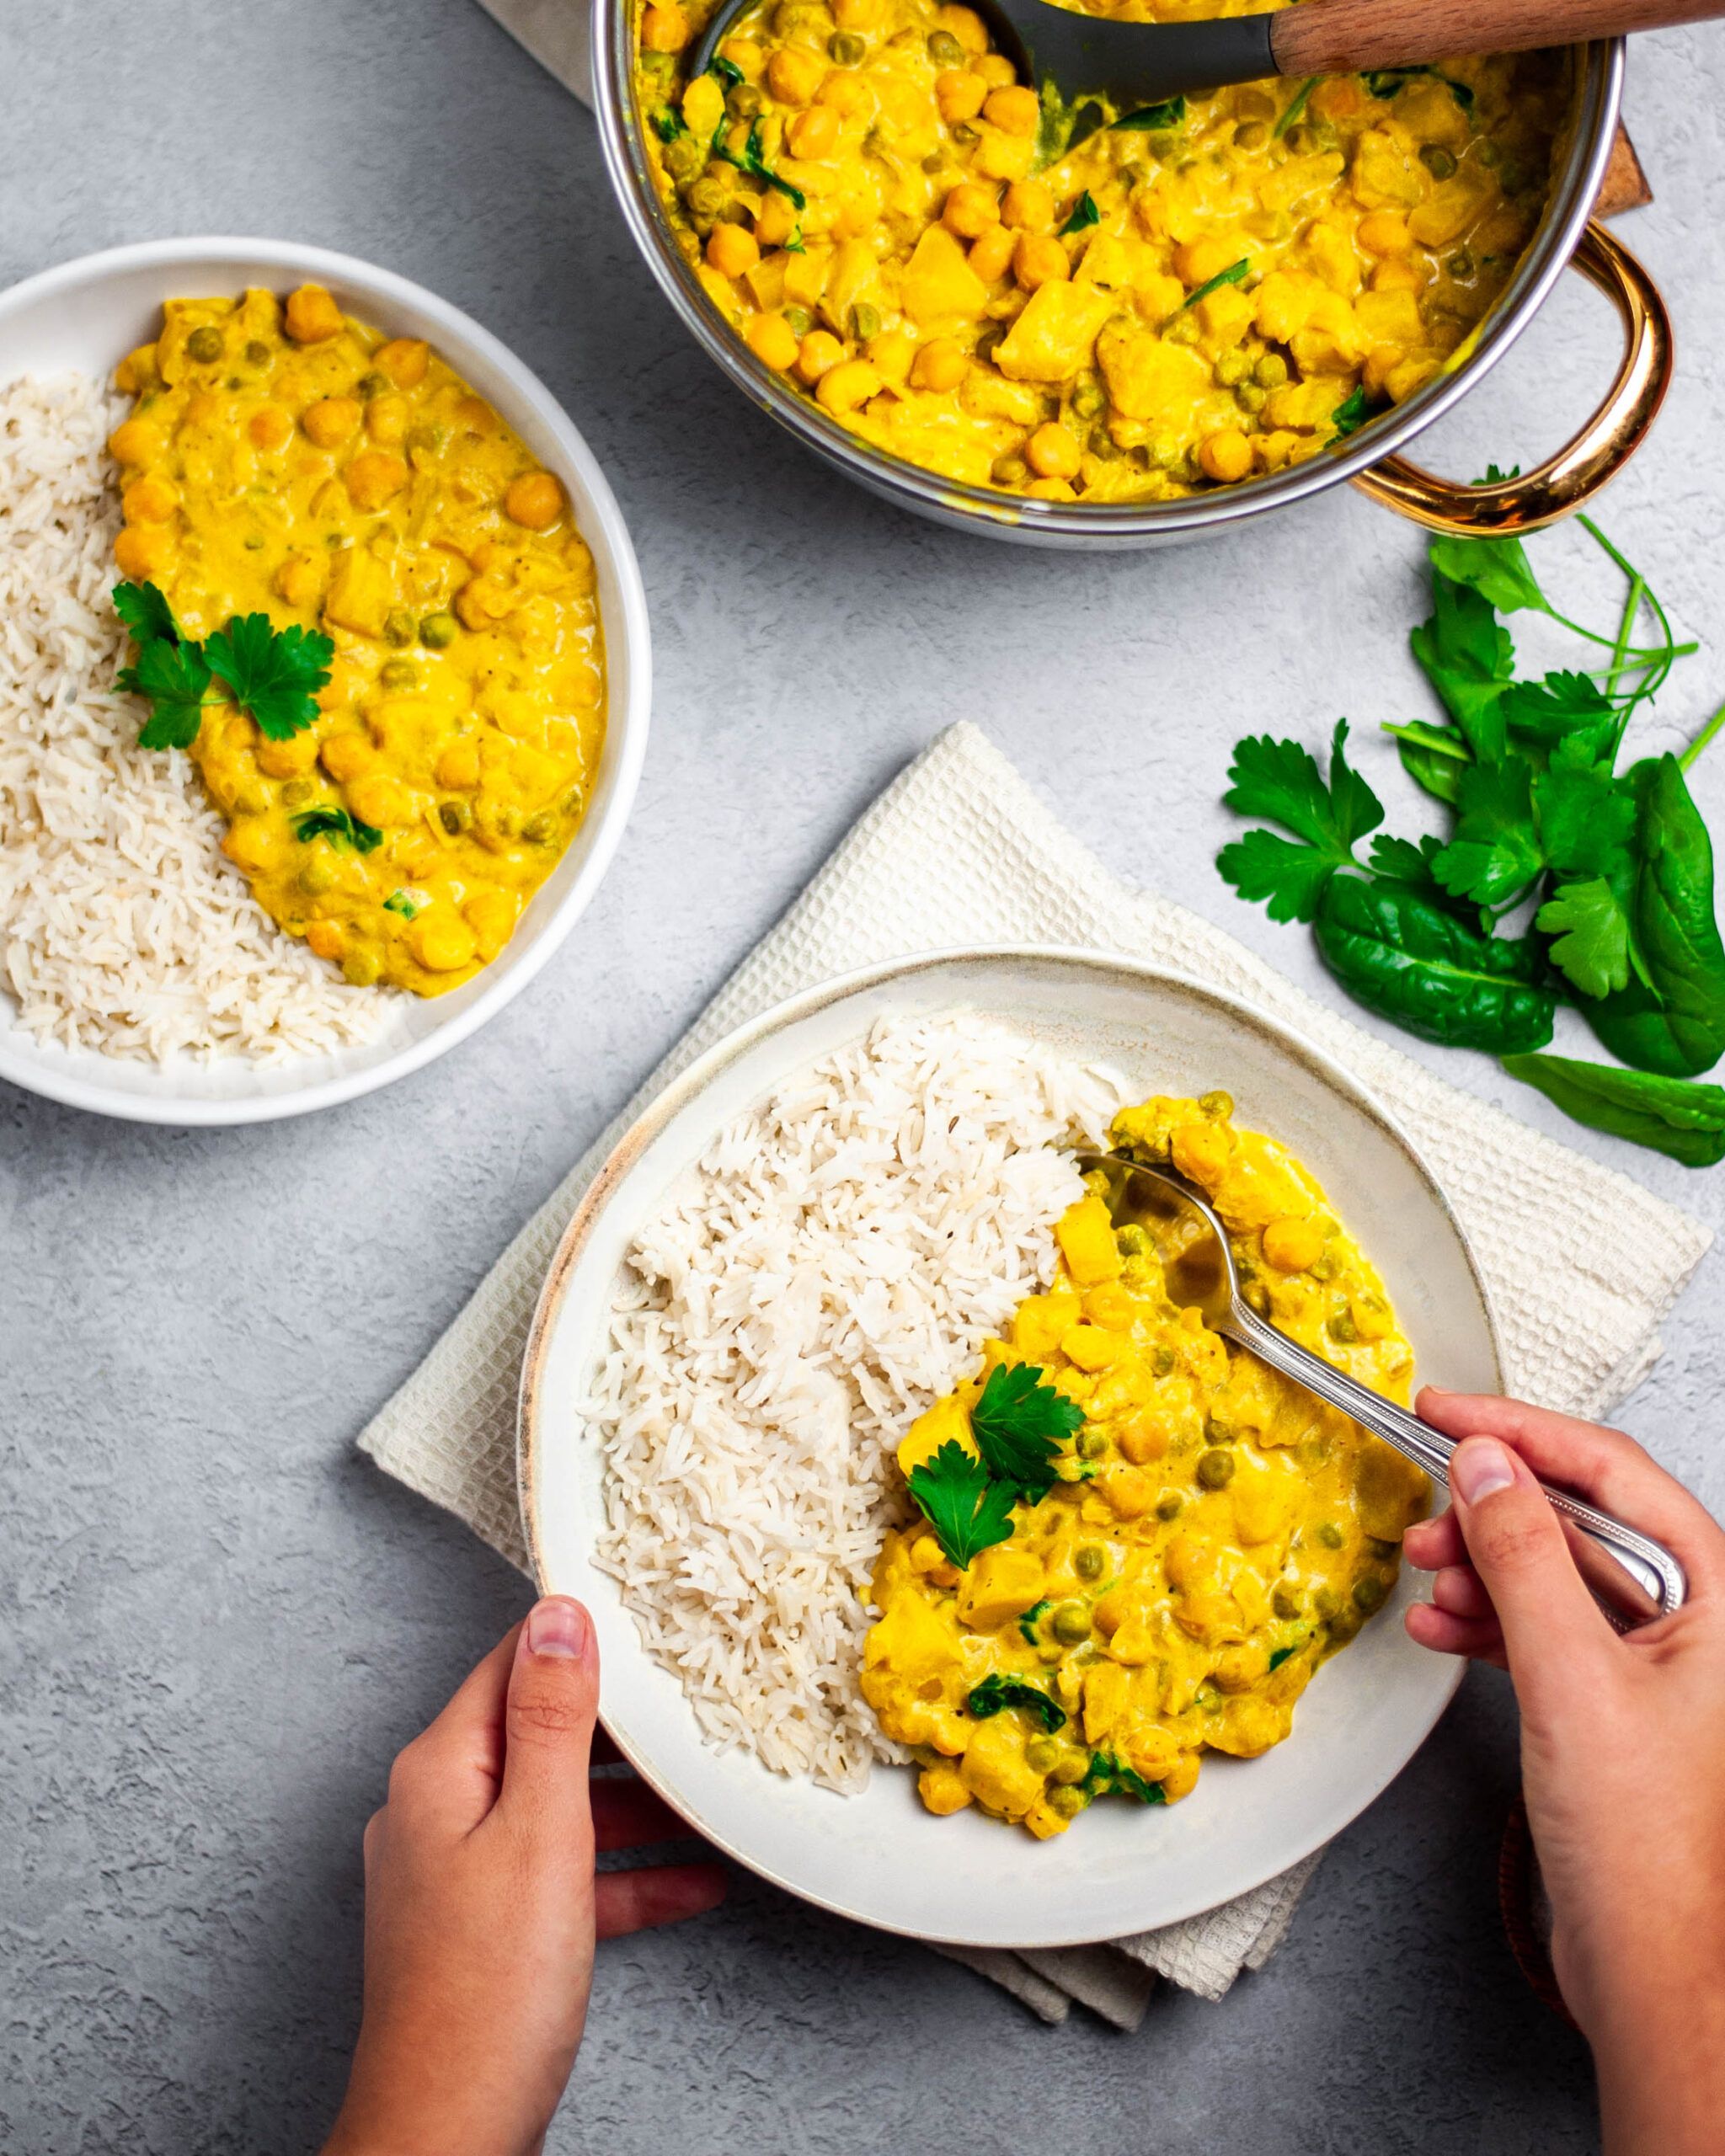 Yellow curry chickpea dish